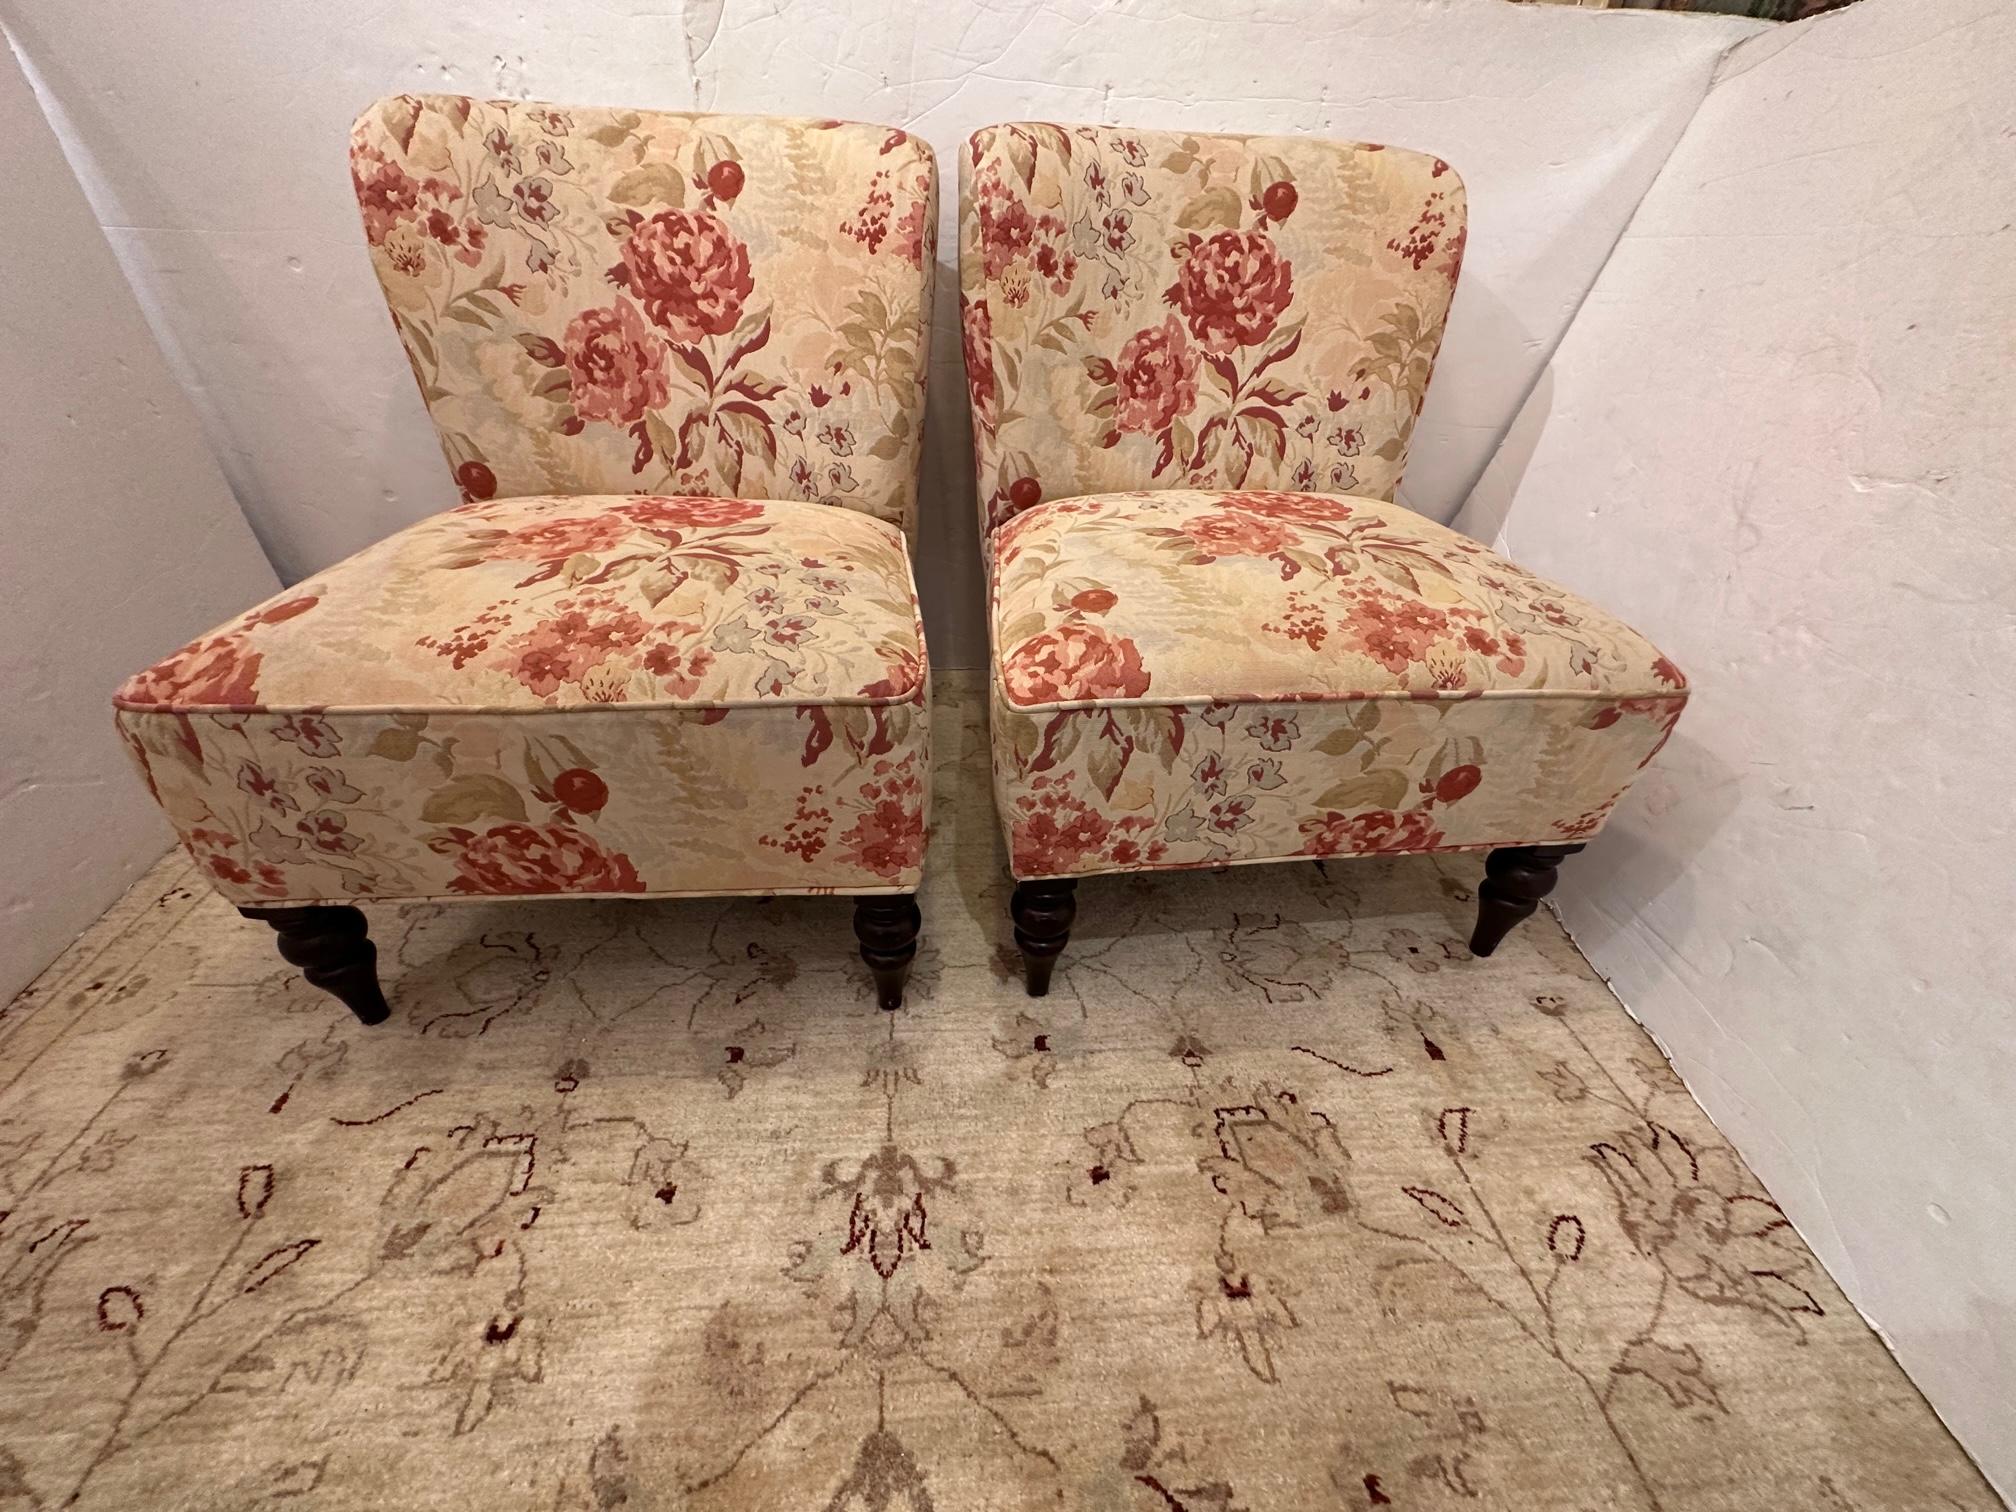 Lovely upholstered pair of slipper chairs in a classic floral pattern and pretty turned mahogany feet.
seat height 17